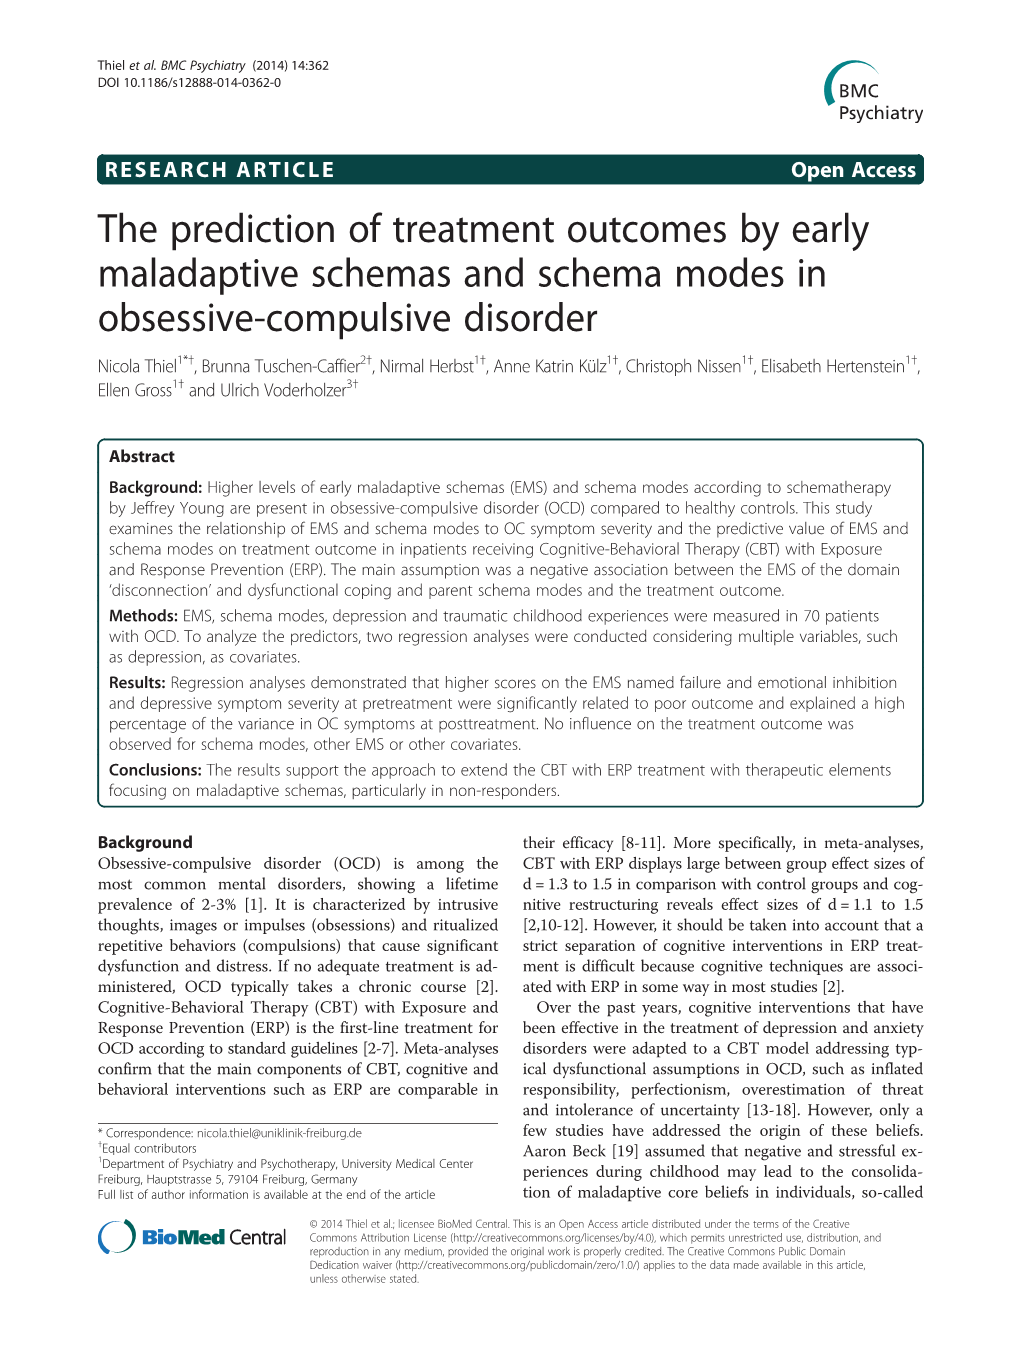 The Prediction of Treatment Outcomes by Early Maladaptive Schemas And